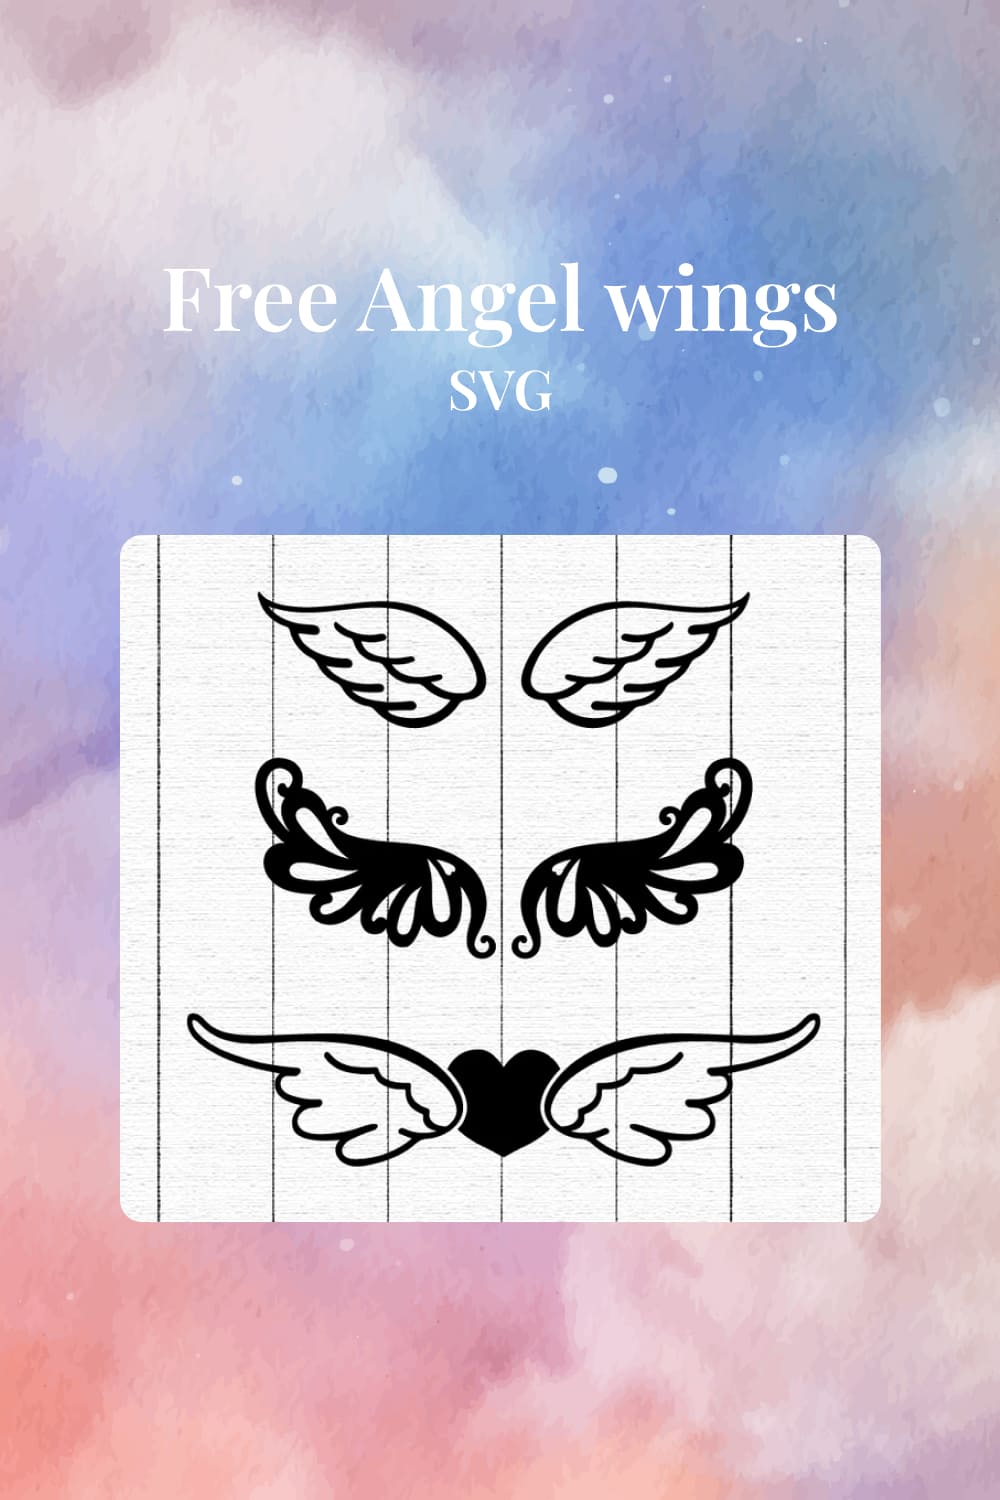 Image of three variants of angel wings in black and white.